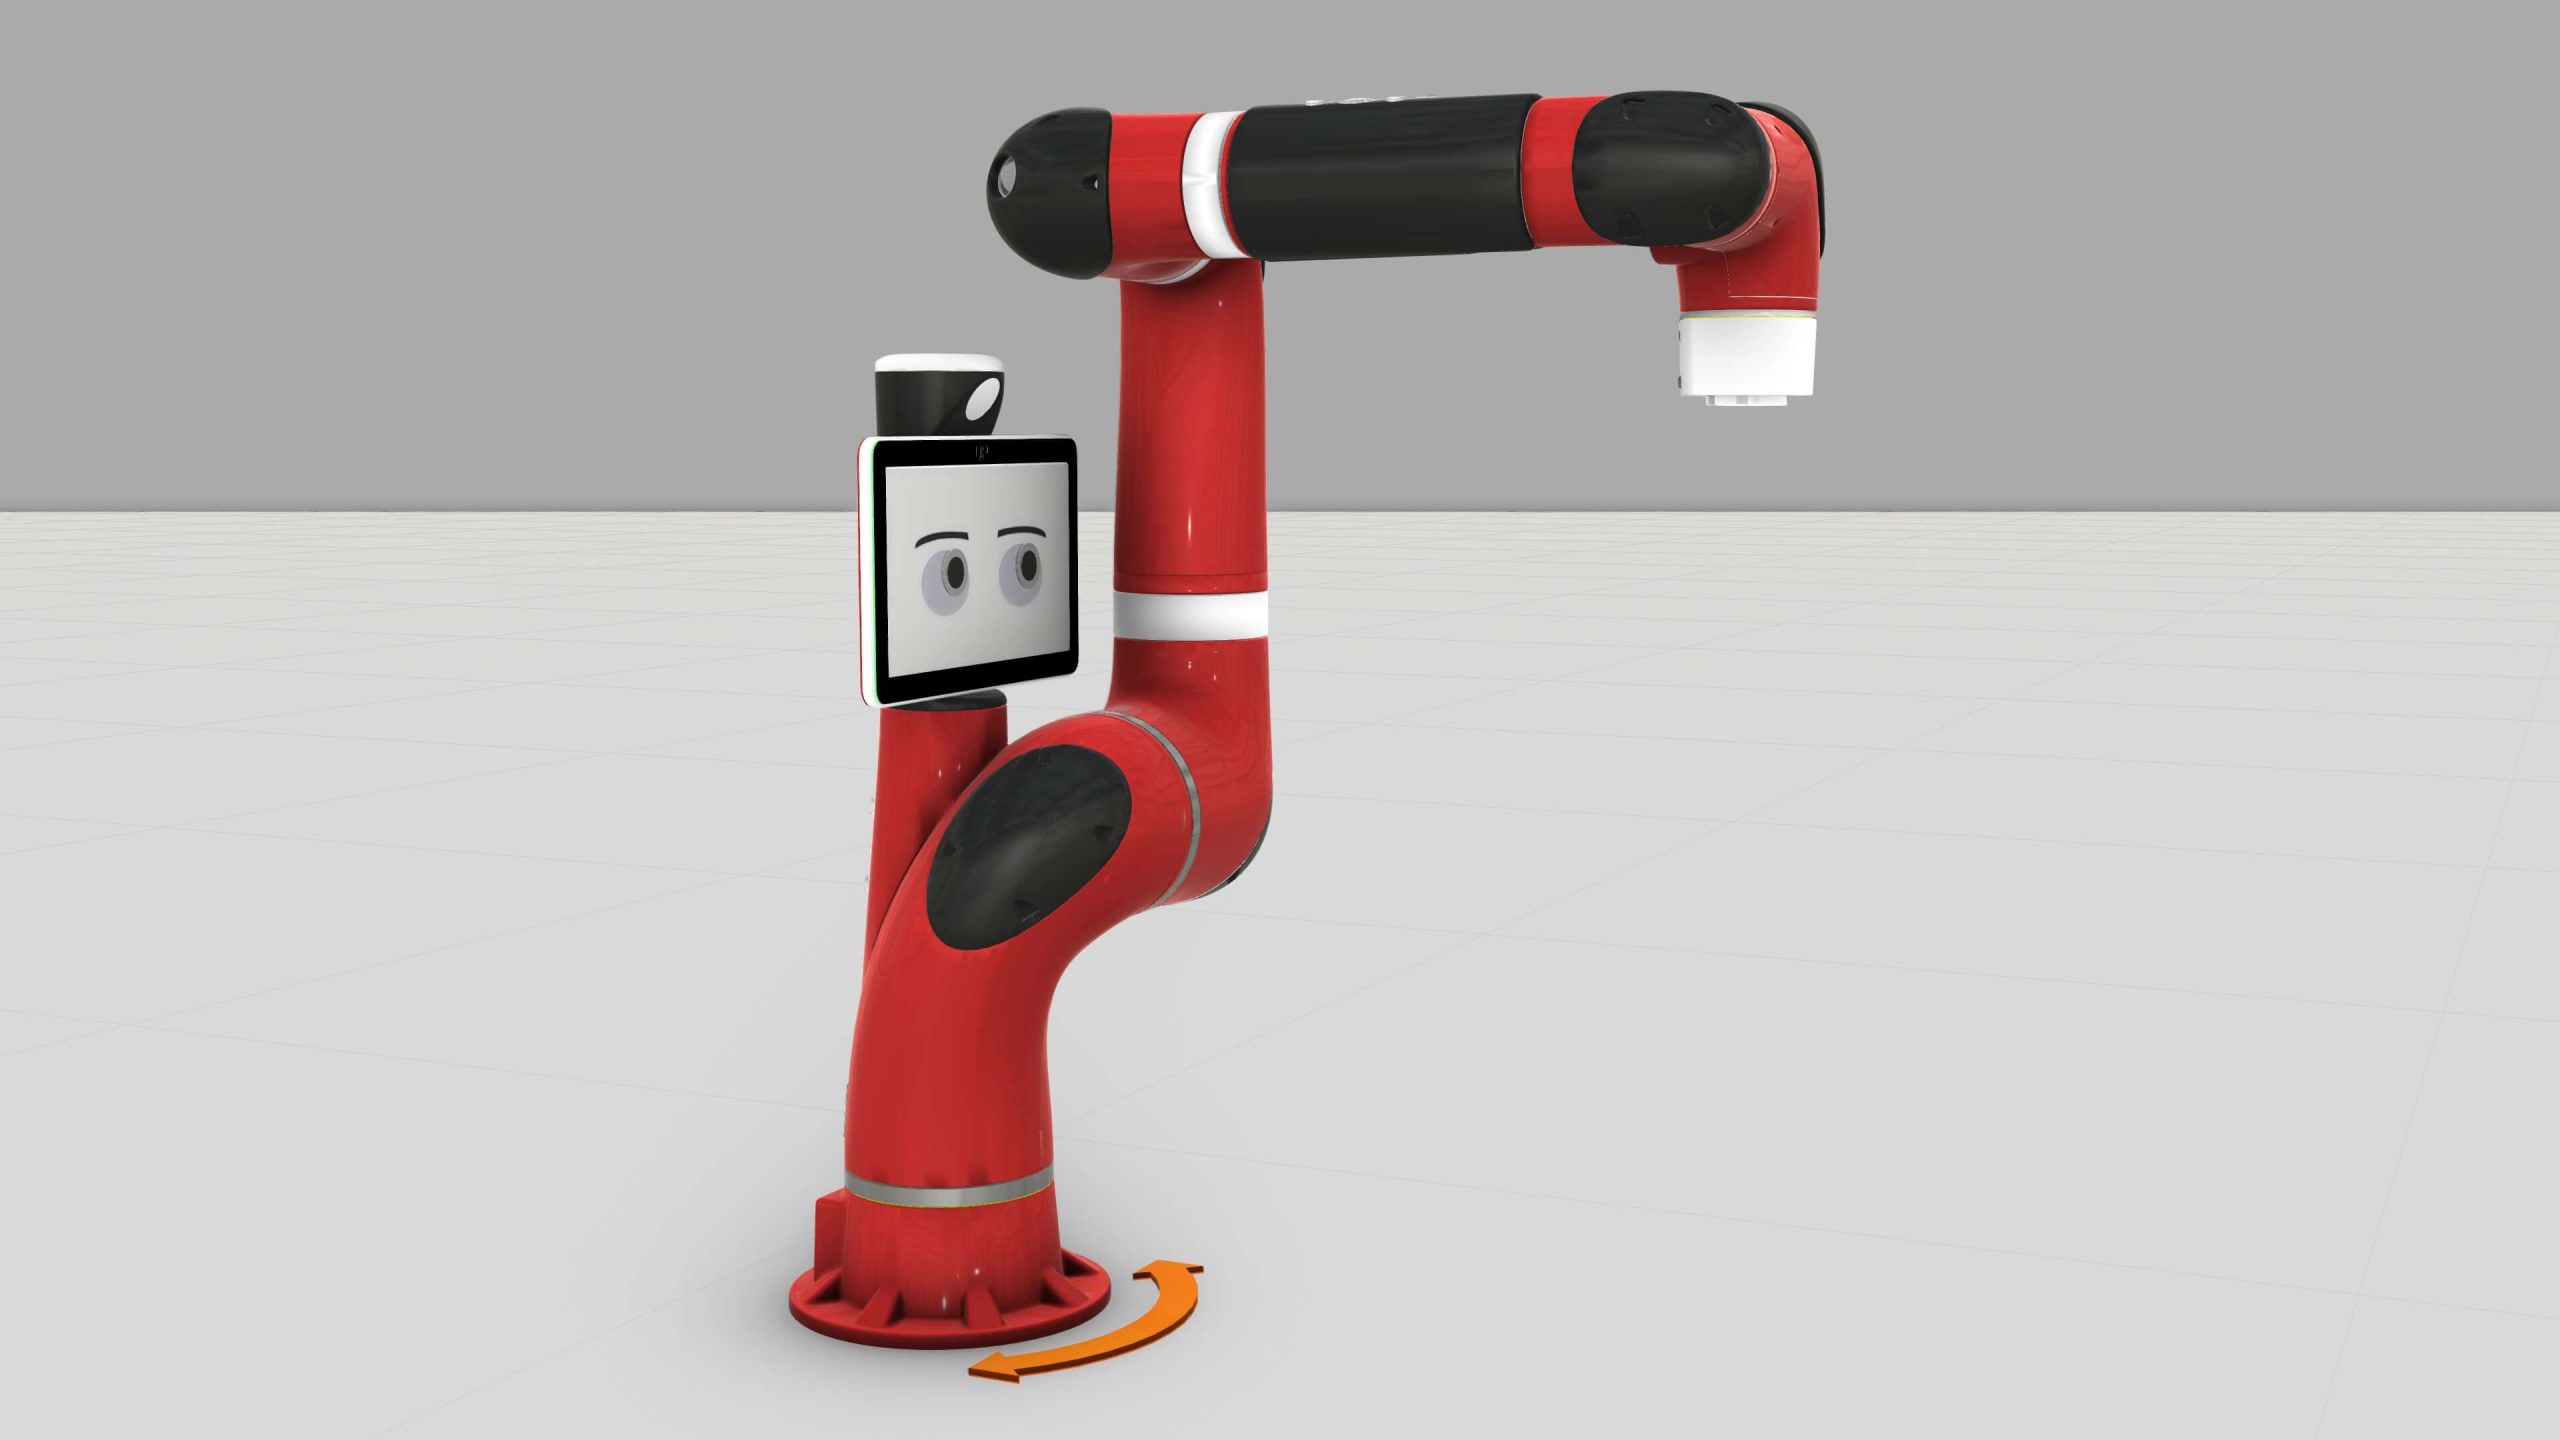 The new Rethink Robotics component additions to Visual Components eCatalog in August 2018